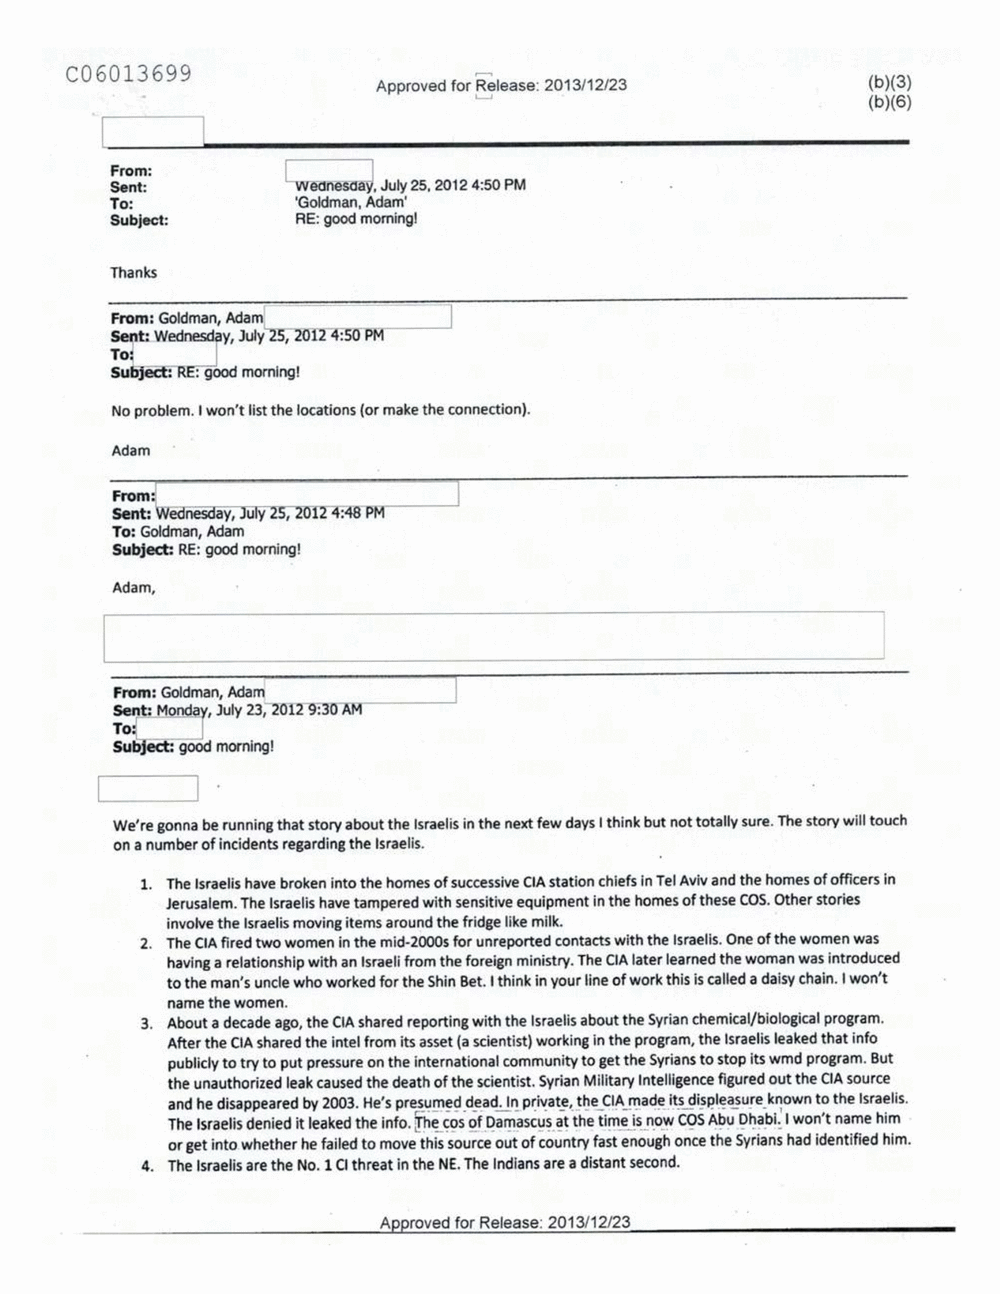 Page 559 from Email Correspondence Between Reporters and CIA Flacks